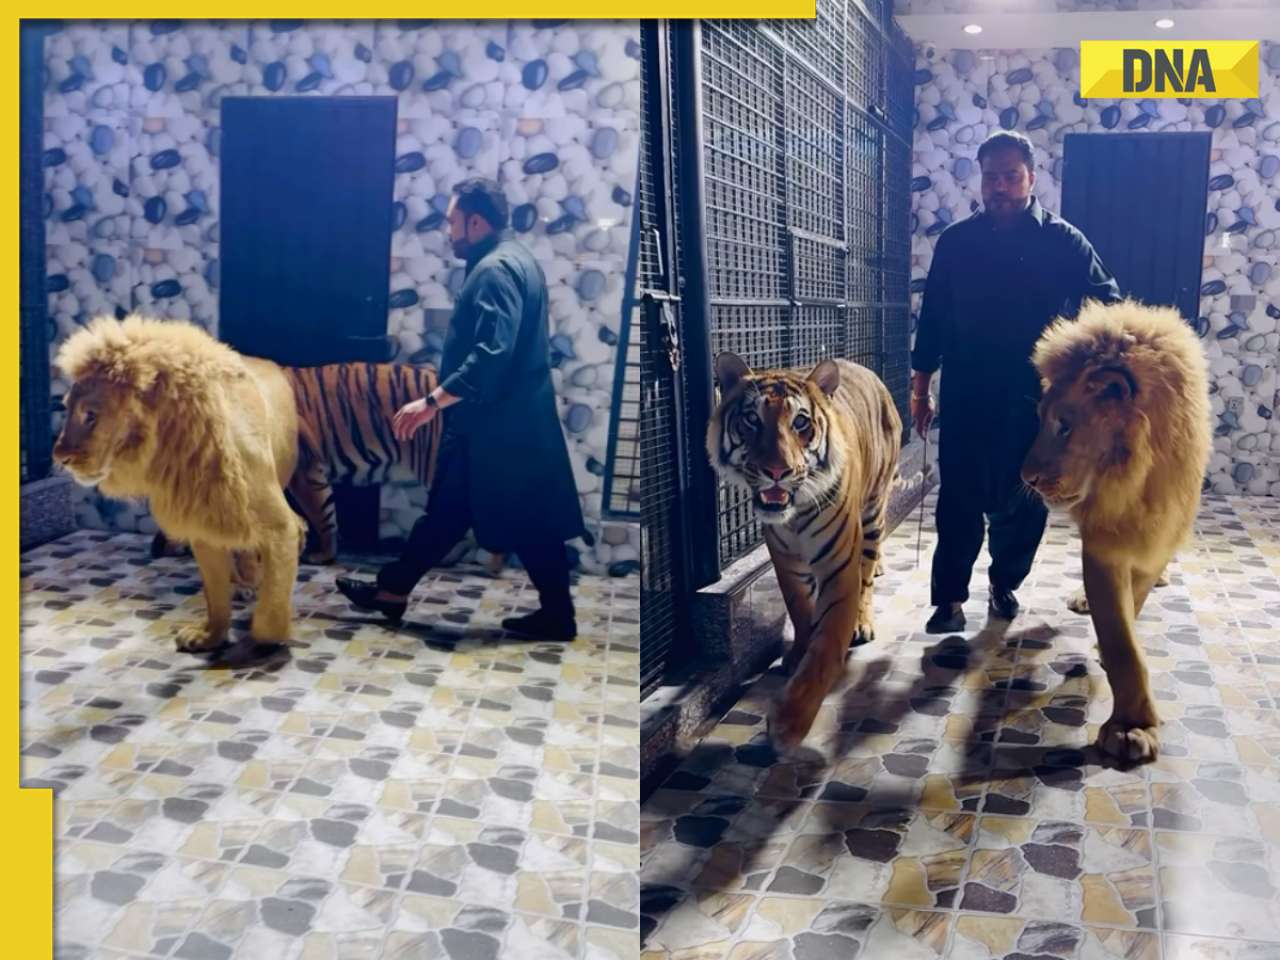 Terrifying! Pakistani man strolls with lion and tiger, viral video ignites online outrage